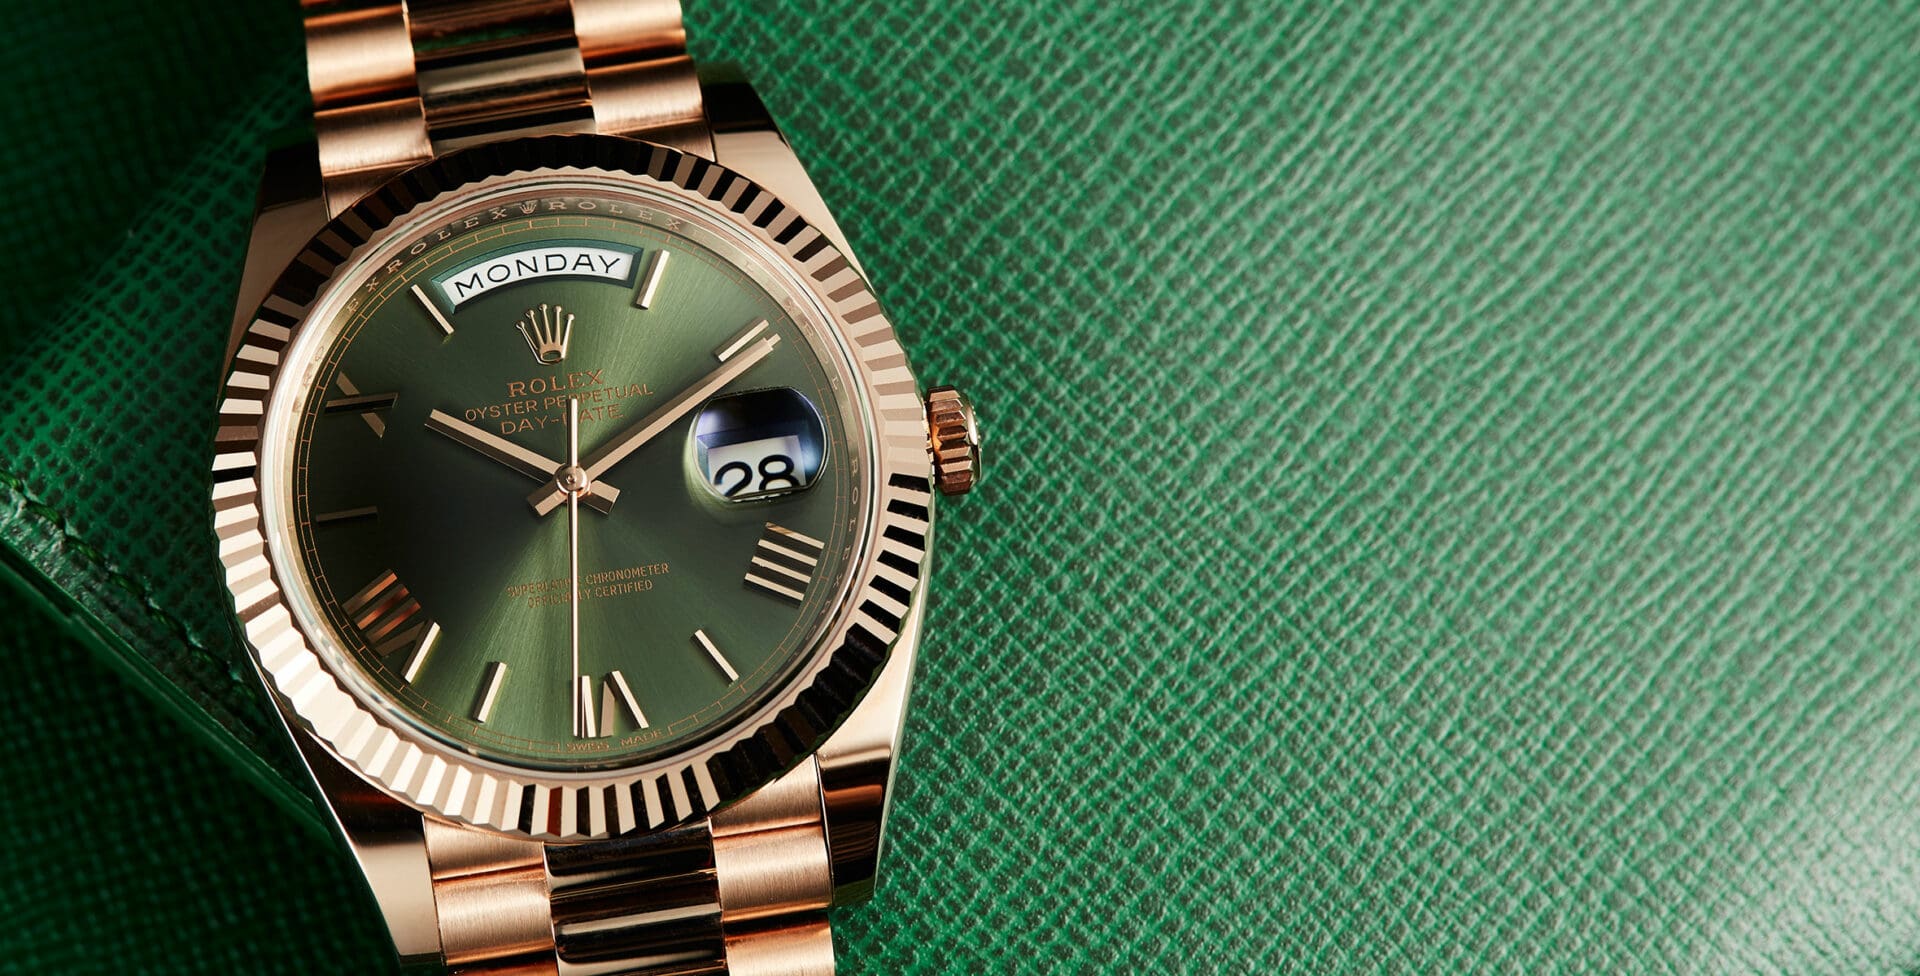 HANDS-ON: The Rolex Day-Date 40 with green dial – 6 decades on and still going strong